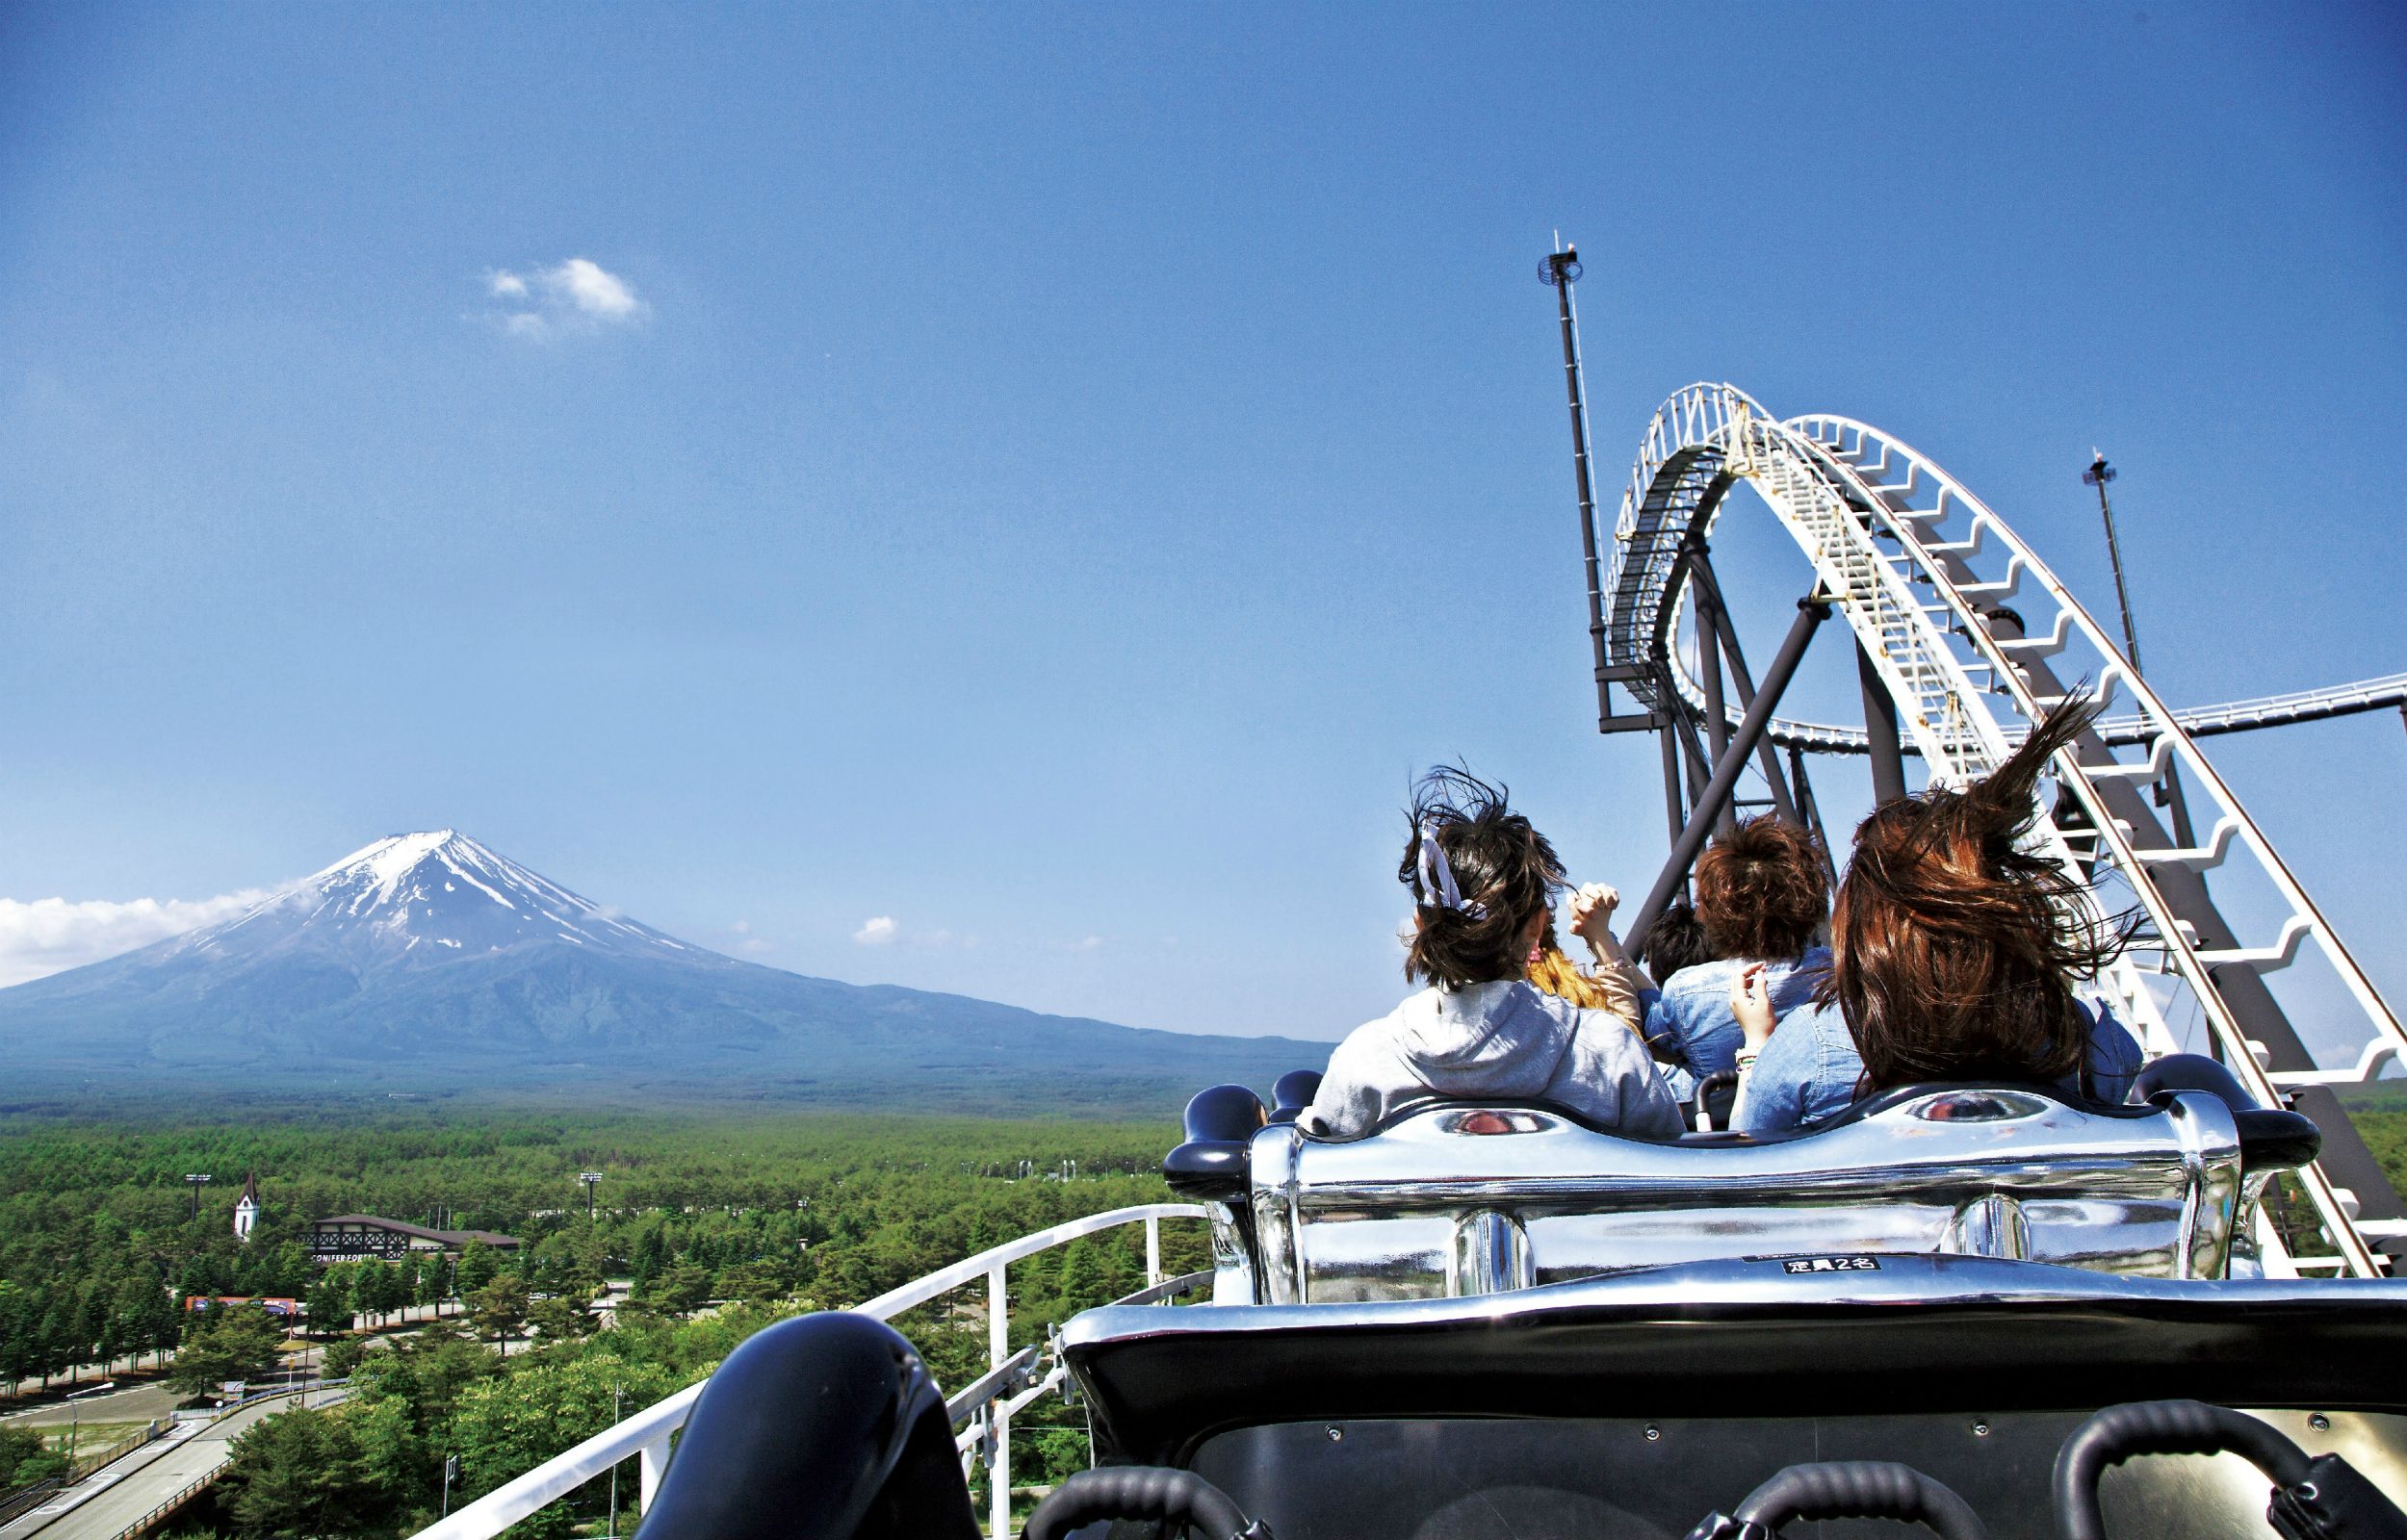 [For inbound travelers] Fuji-Q Highland Free Pass with Priority Admission (Early Park Admission)